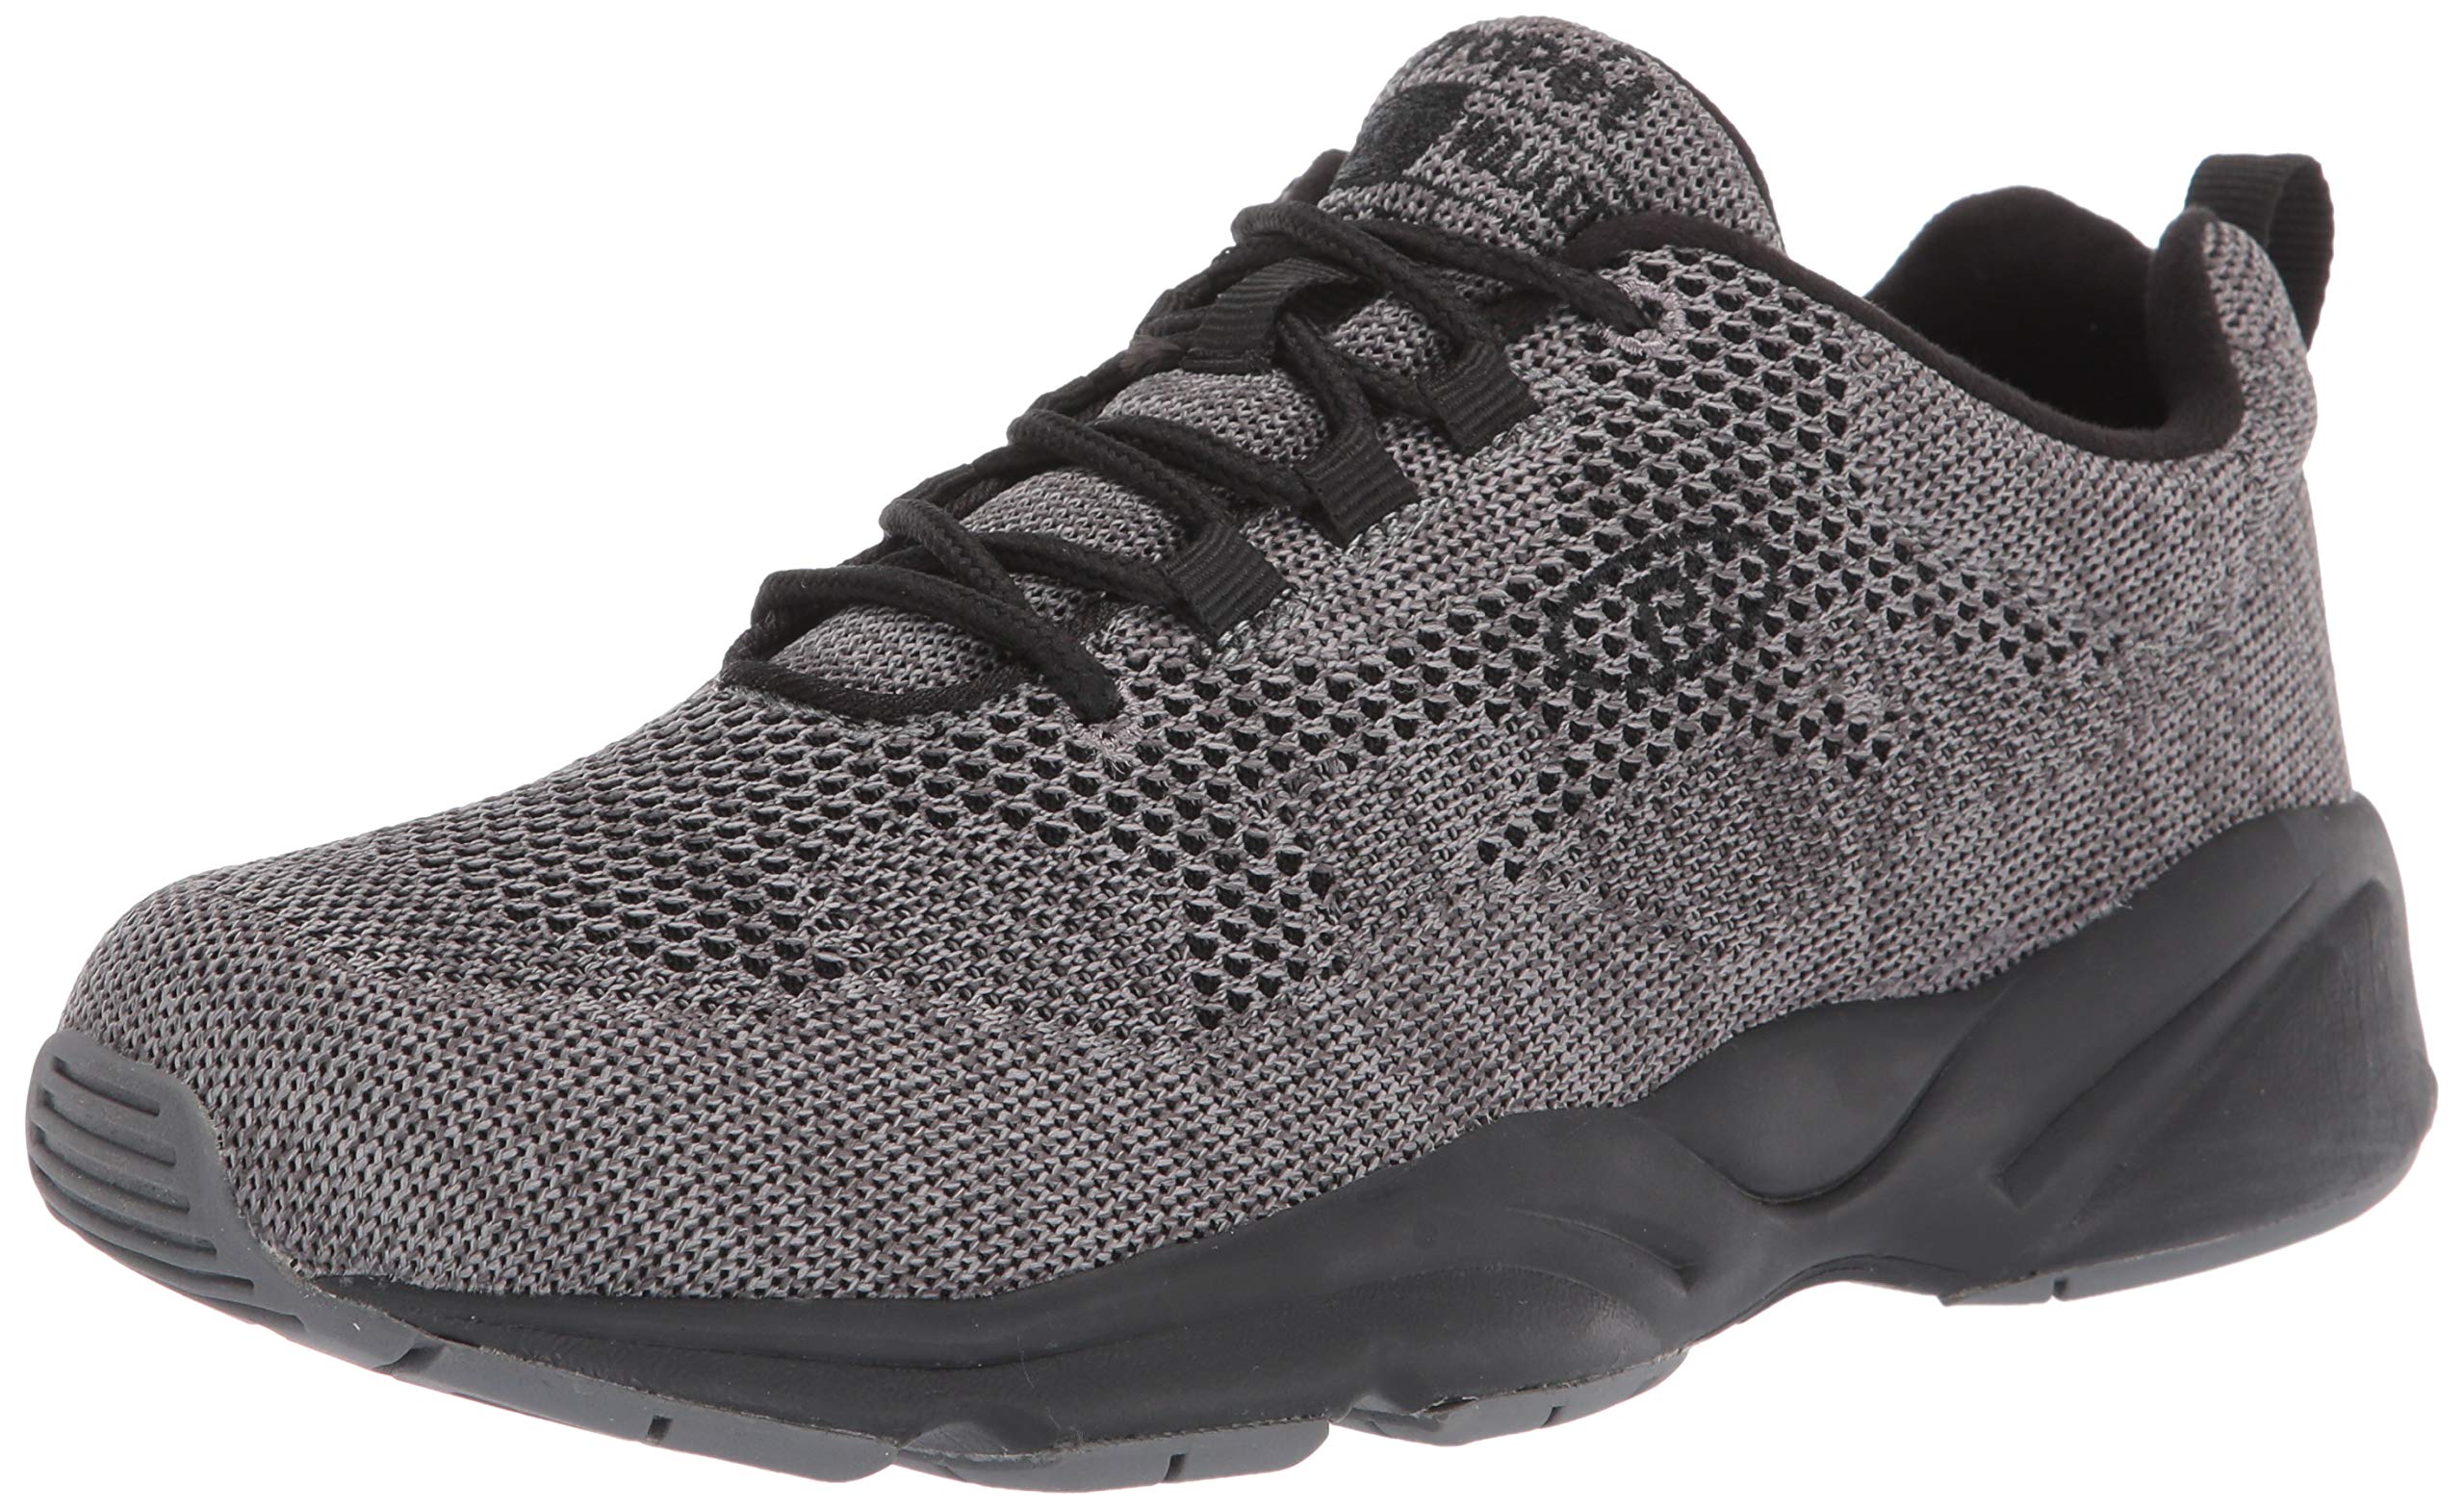 Propet Mens Stability X Fly Walking Walking Sneakers Athletic Shoes - Grey